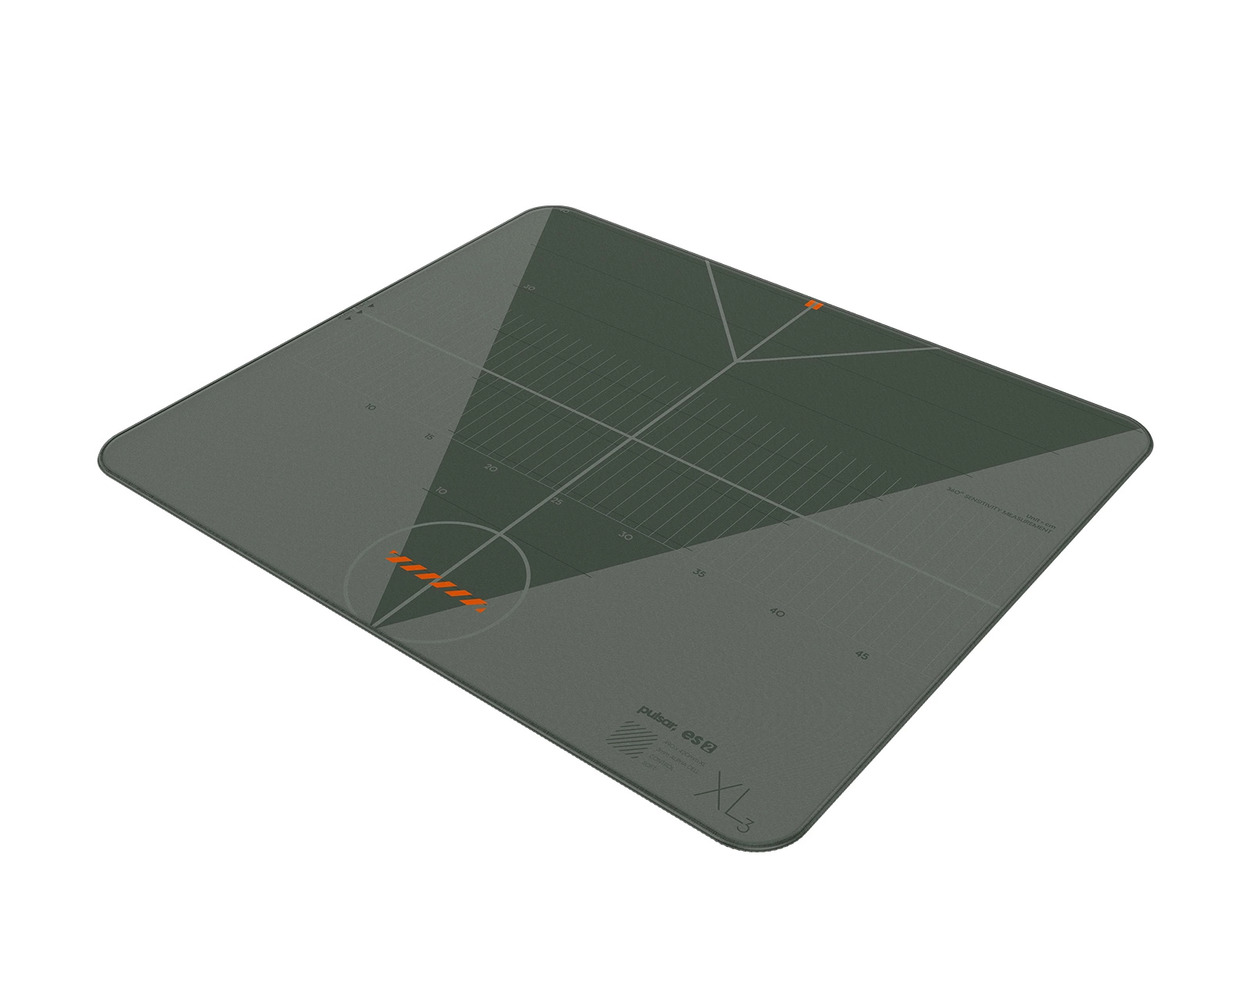 Pulsar ES2 Gaming Mousepad - Aim Trainer Limited Edition 3